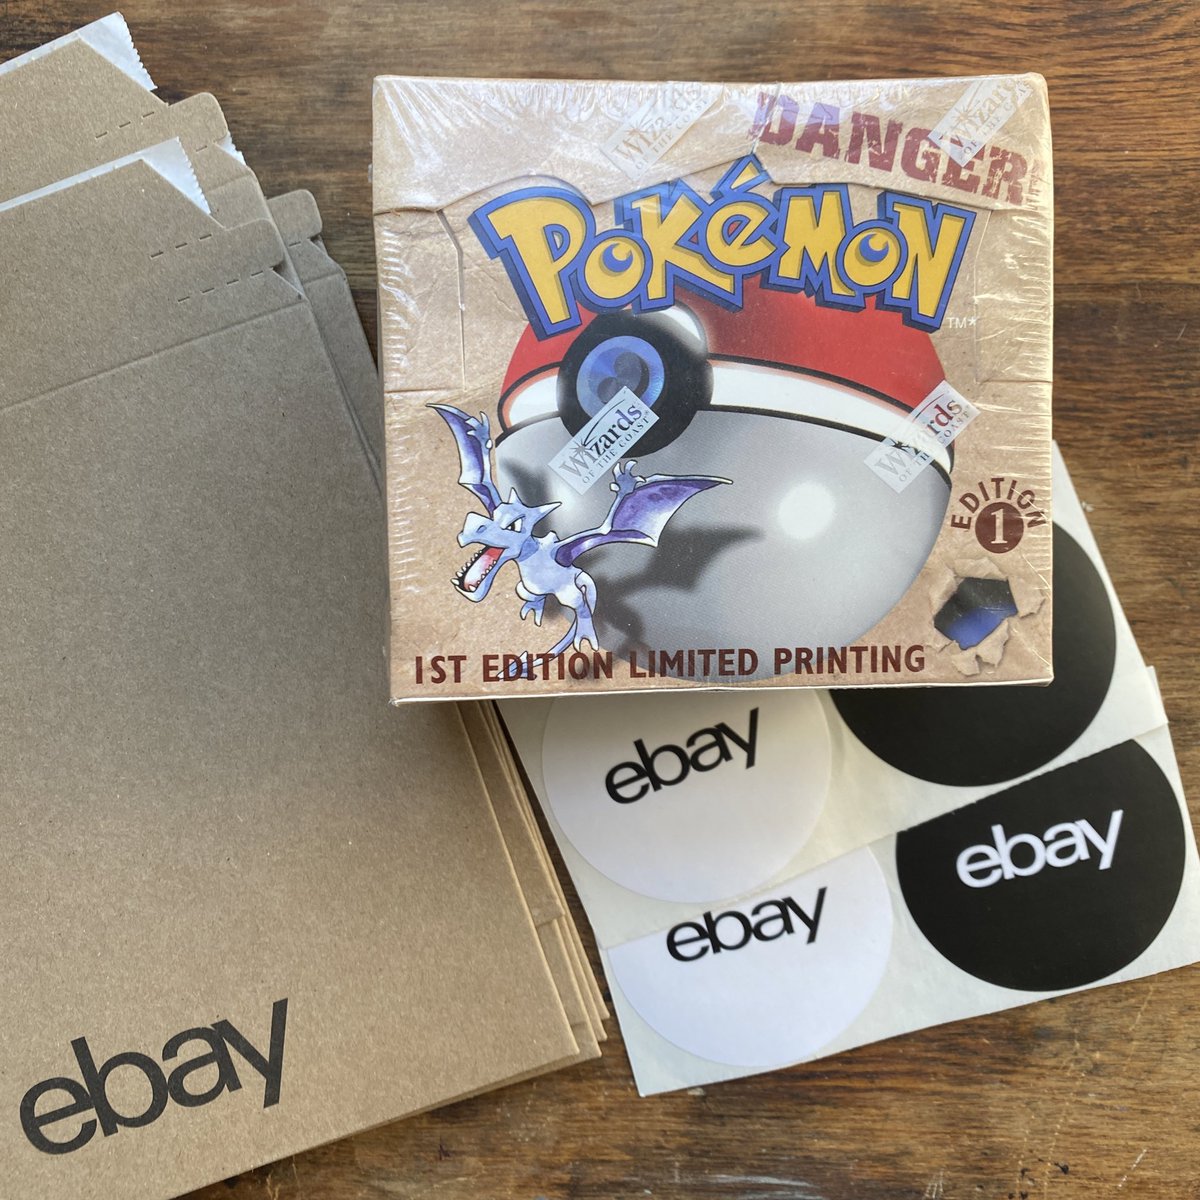 tomorrow on stream at 9pm EST we will be cracking into this first edition fossil box for the 25th anniversary of pokémon. shoutout to @ebay for supplying the goods! #ebaypartner 

twitch.tv/chrismelberger